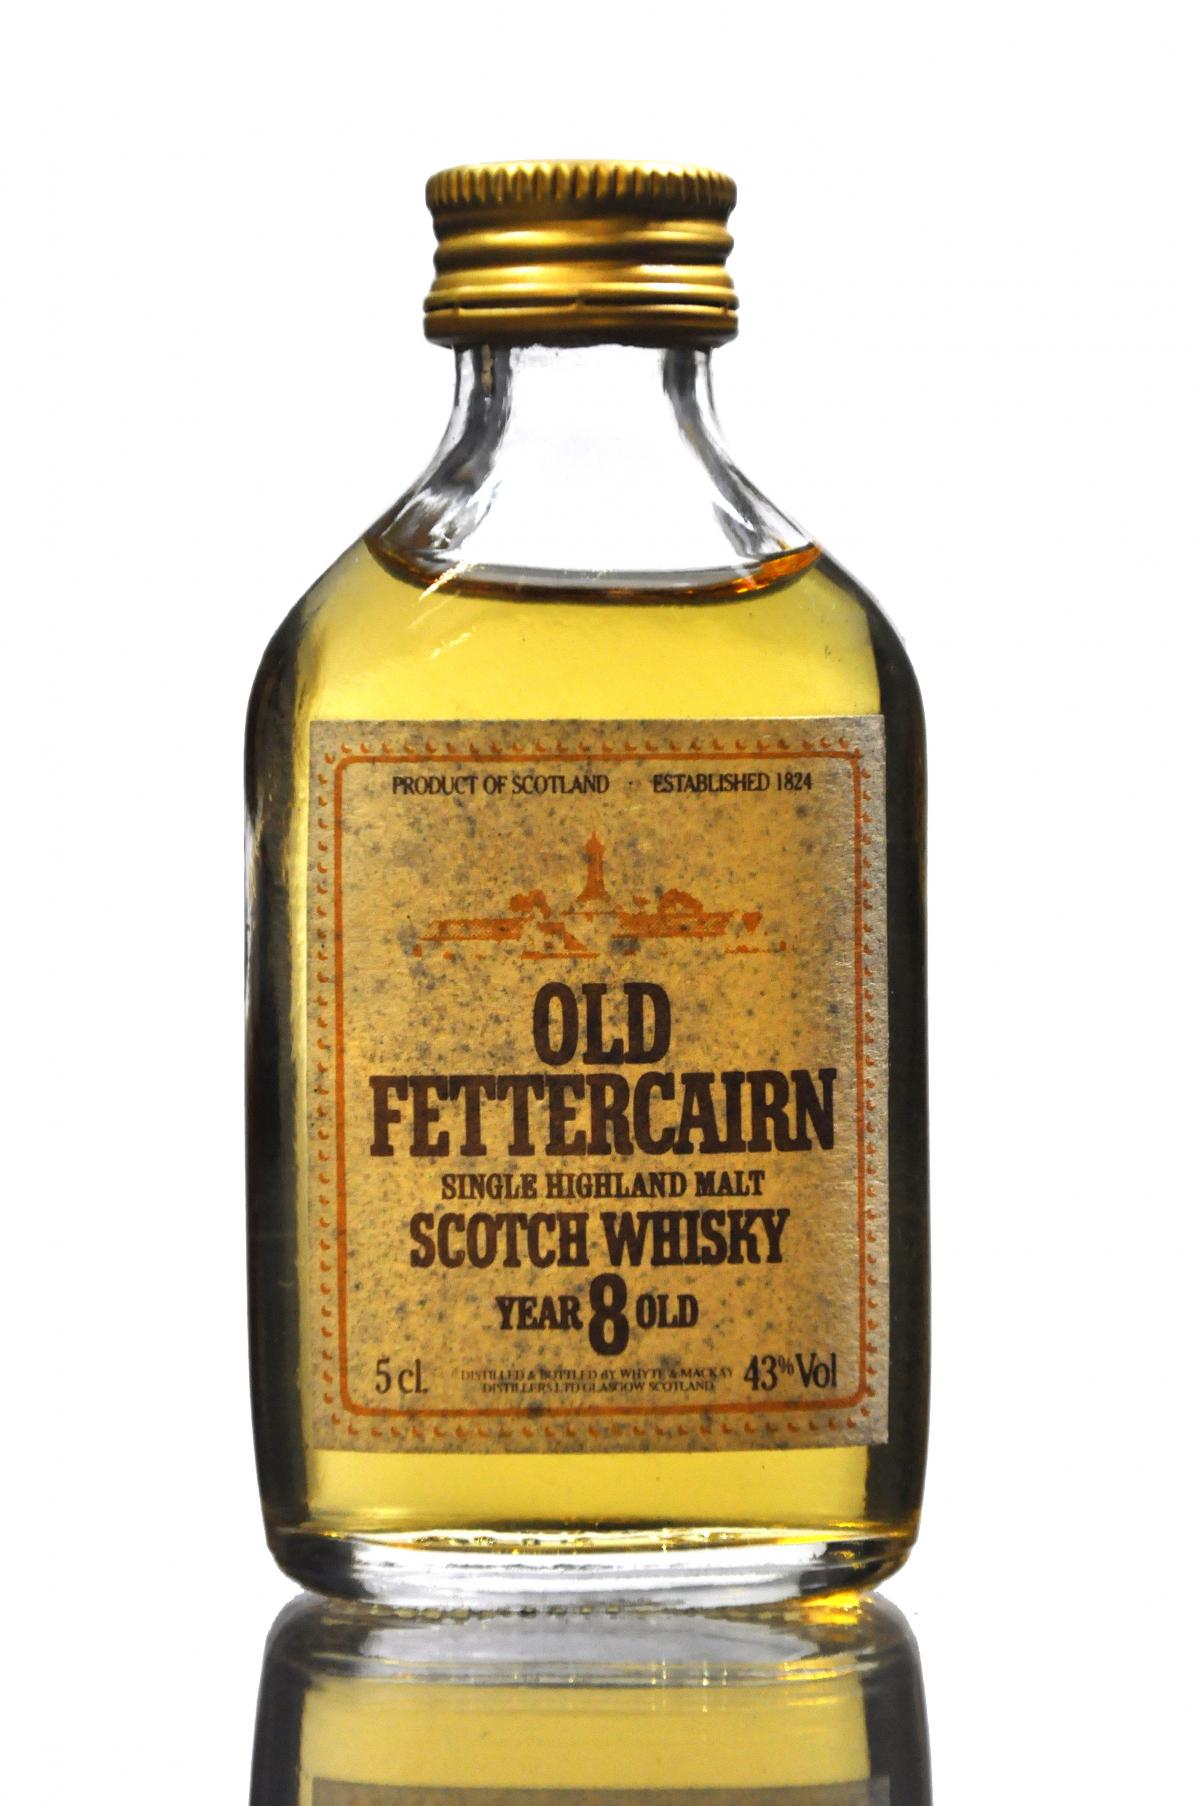 Old Fettercairn 8 Year Old Miniature